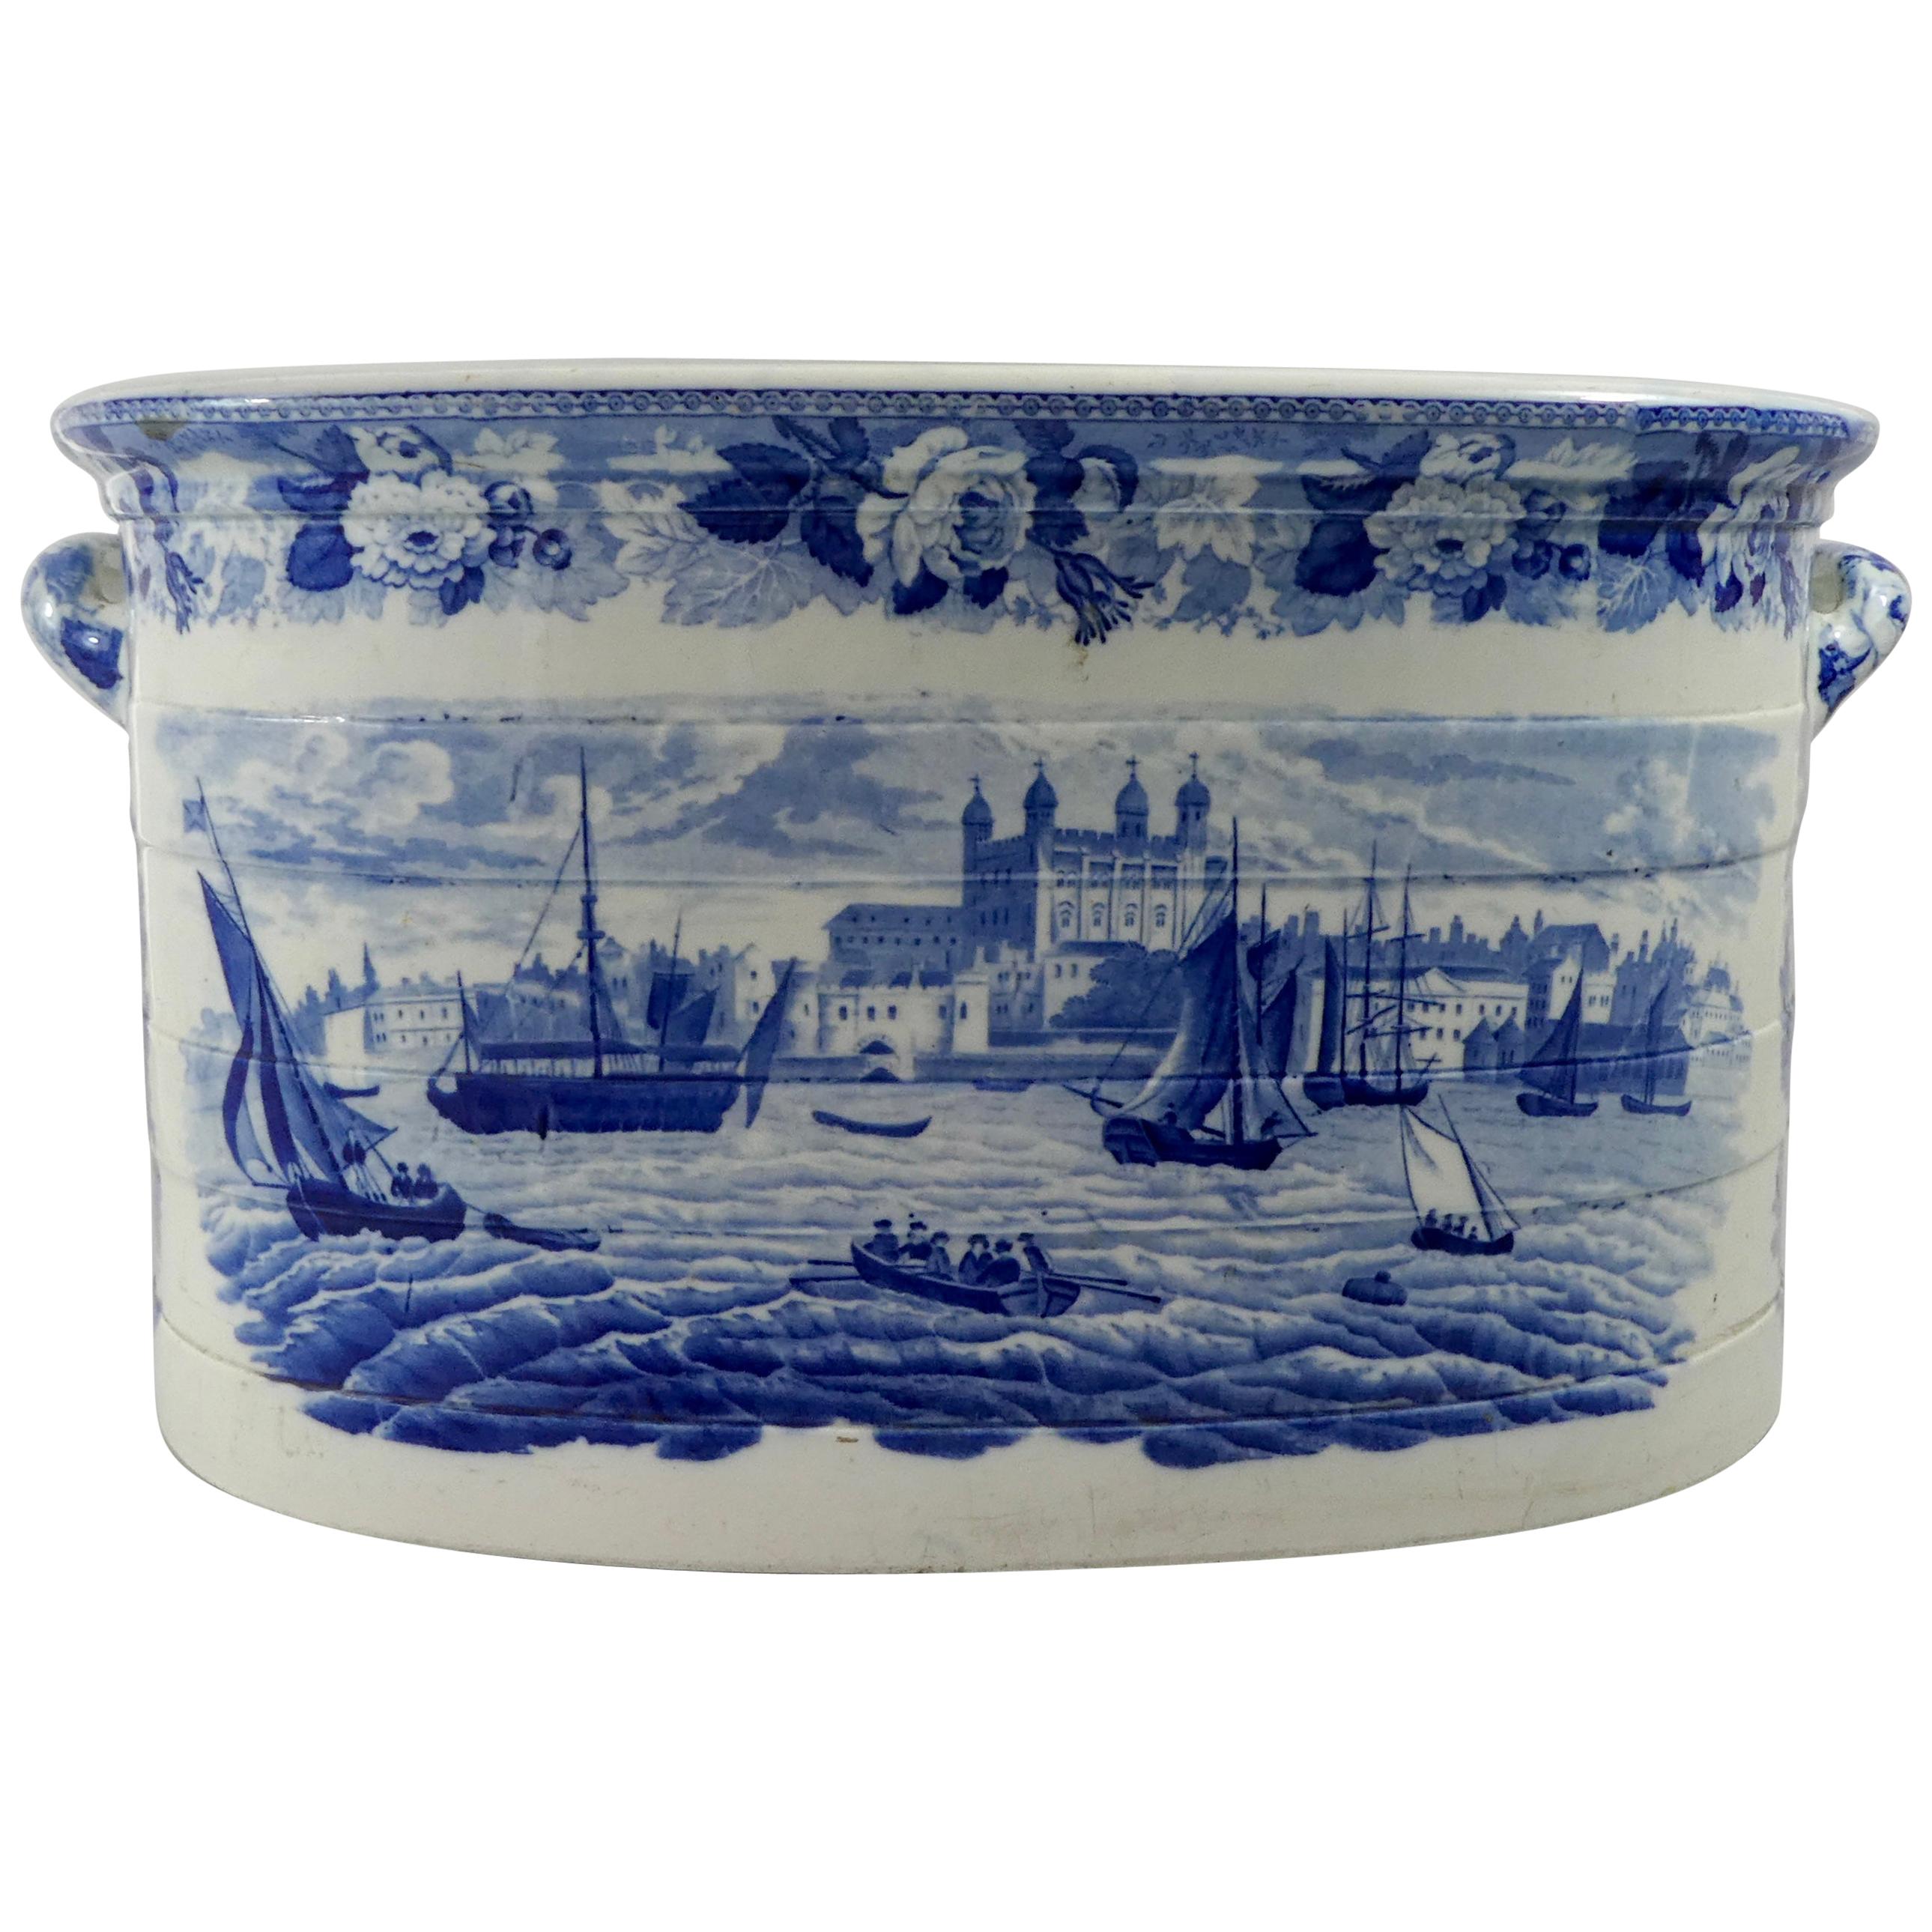 Wedgwood Pottery Foot Bath. ‘Tower of London from the Thames’, circa 1820